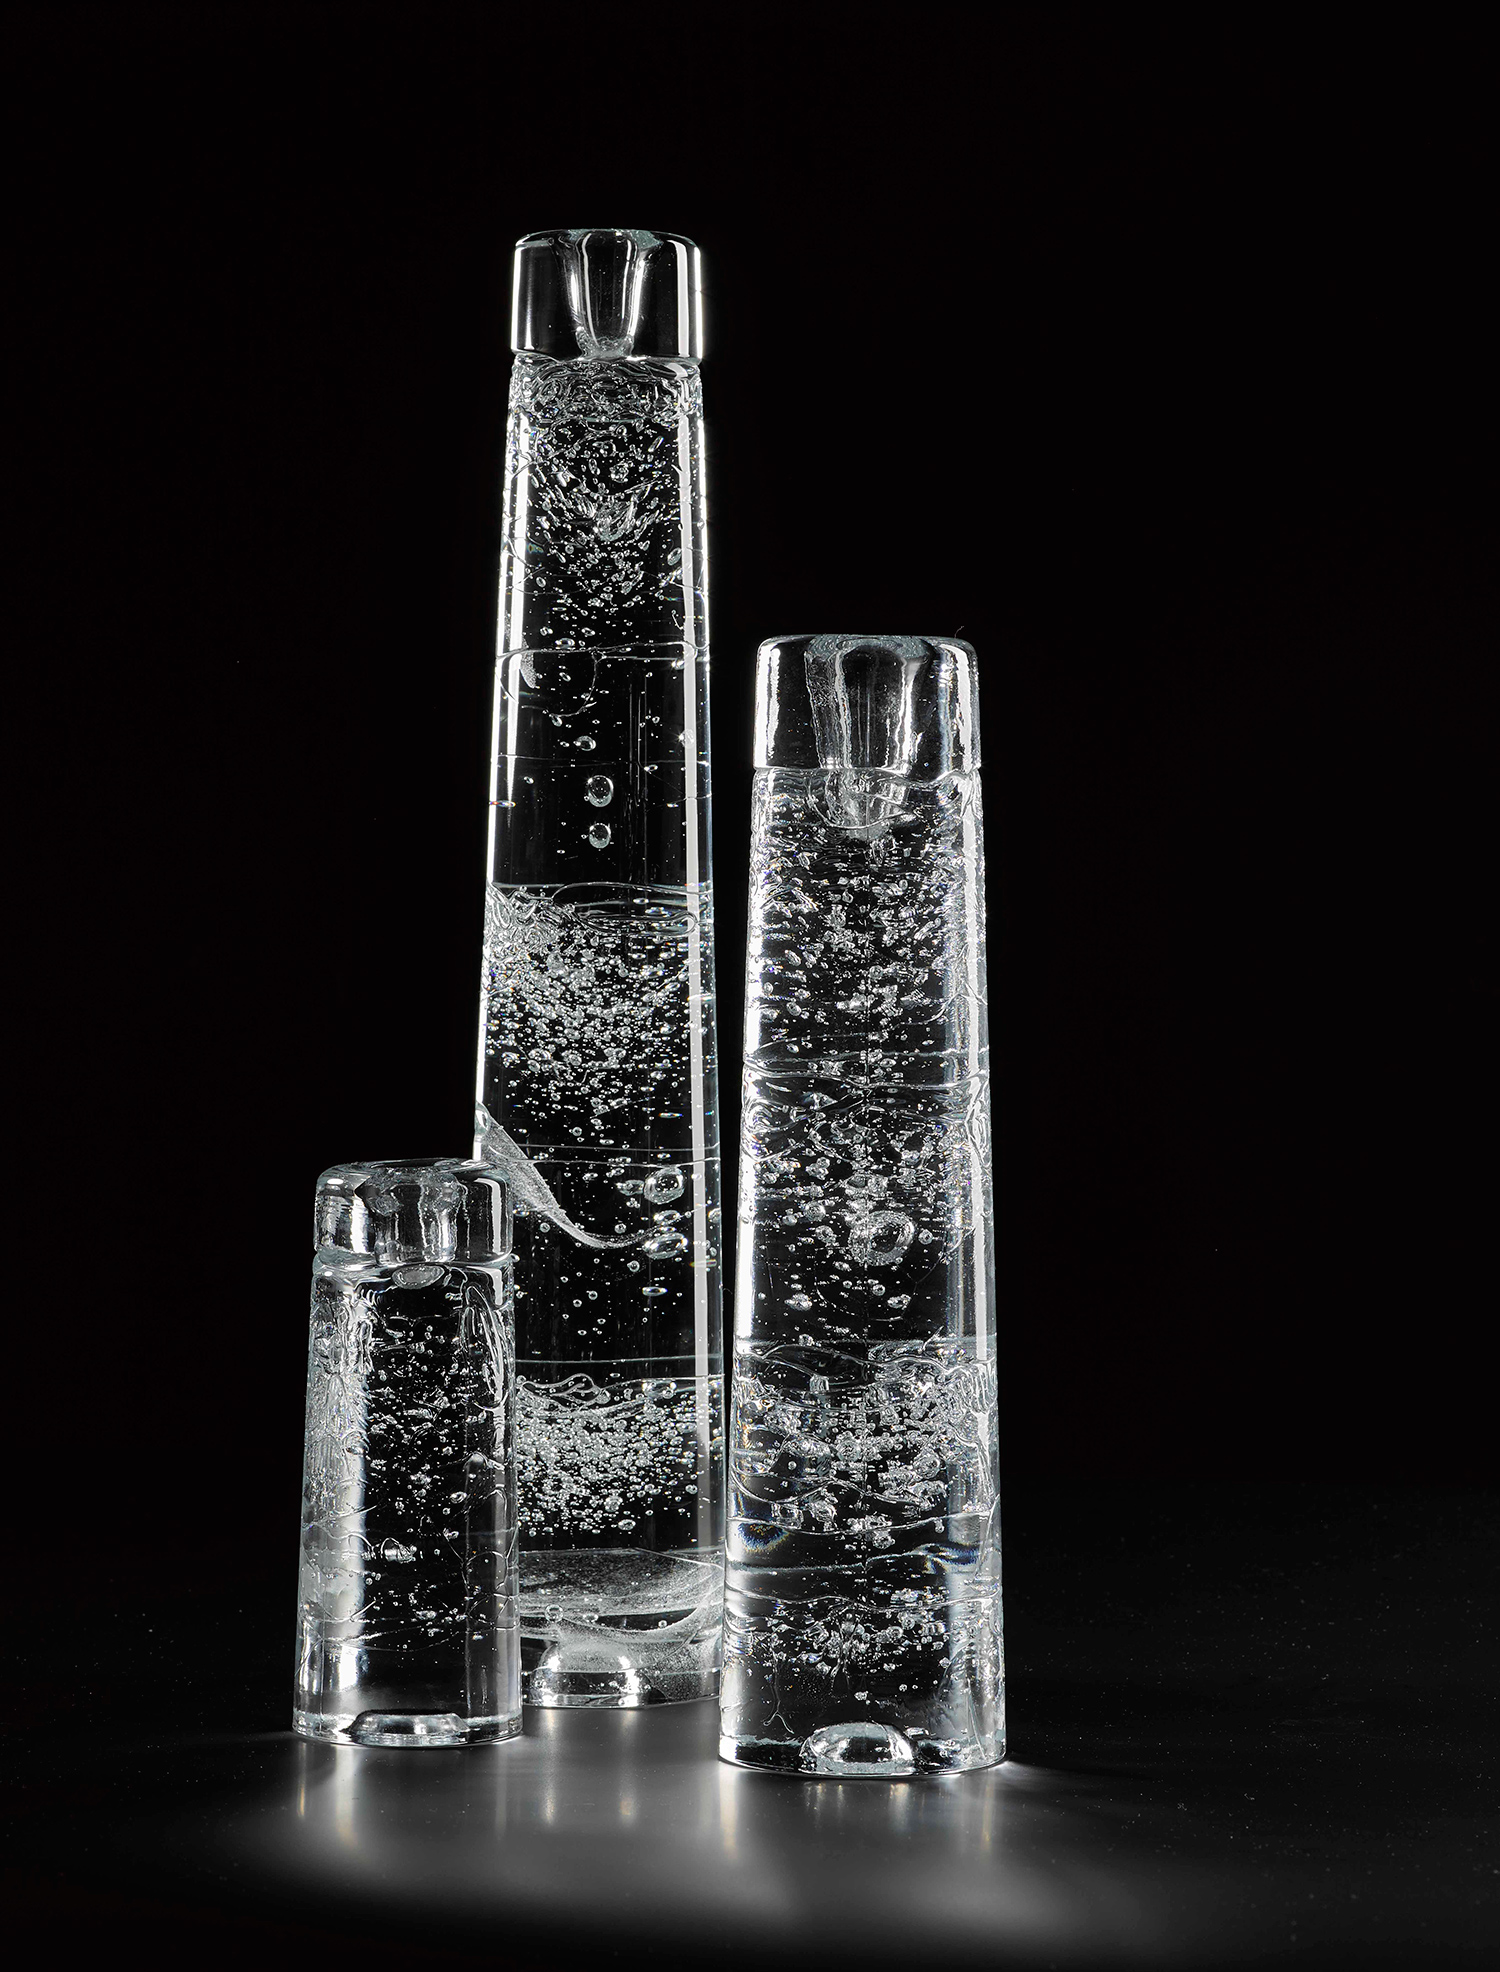 'Arkipelago' candle holder of cast clear glass with visible bubbles and irregular surface, designed by Timo Sarpaneva for Iittala, Finland